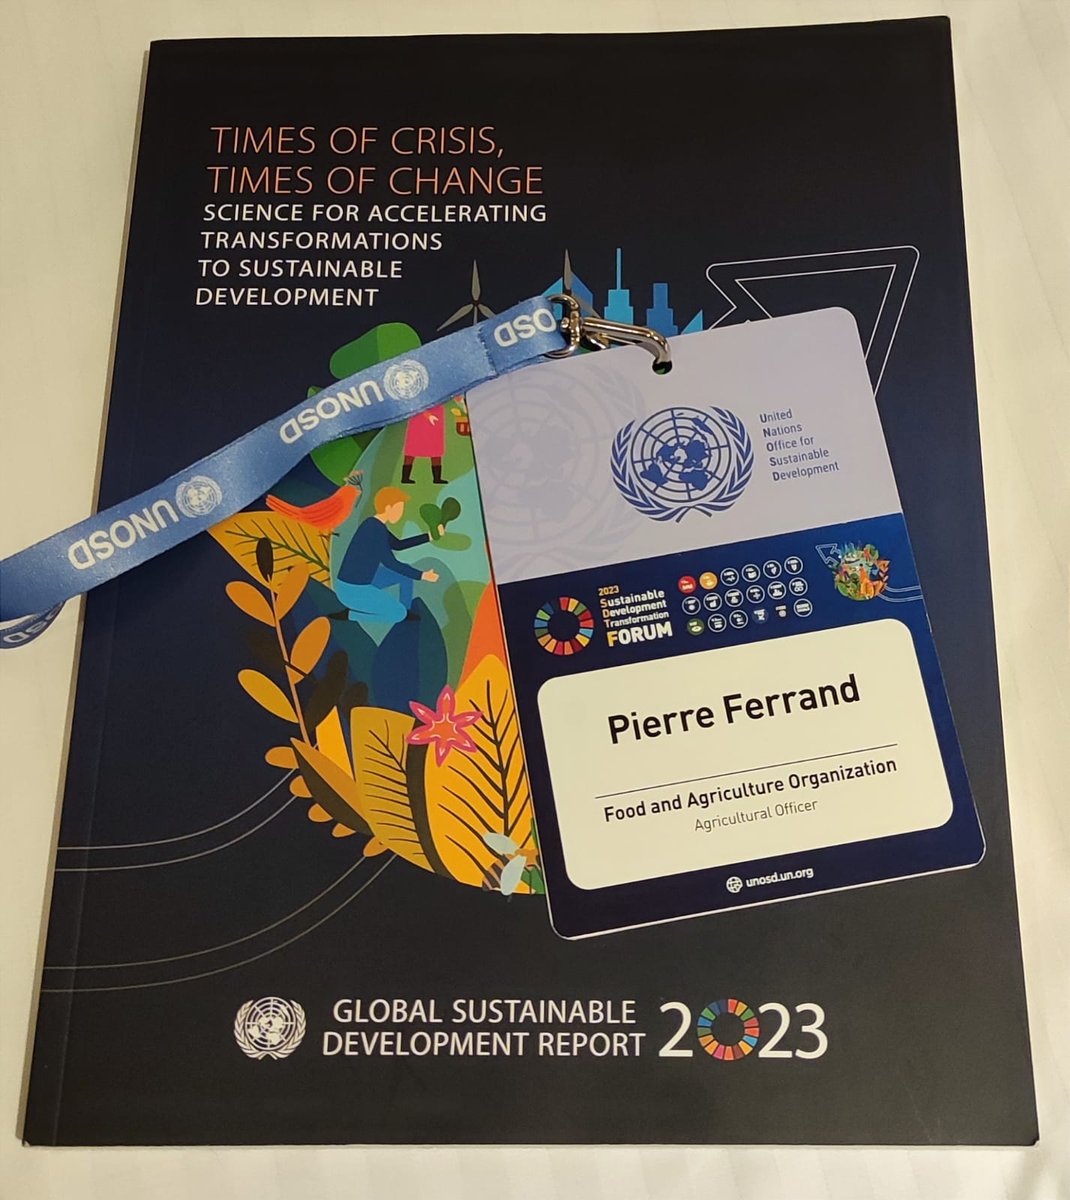 Many thanks to @un_osd for inviting me to this year Sustainable Development Transformation Forum (#SDTF2023). Great opportunity to make the case for #agroecology as an accelerator of #SDGs implementation & transformative pathway for #sustainable_food_systems
#agroecologyworks